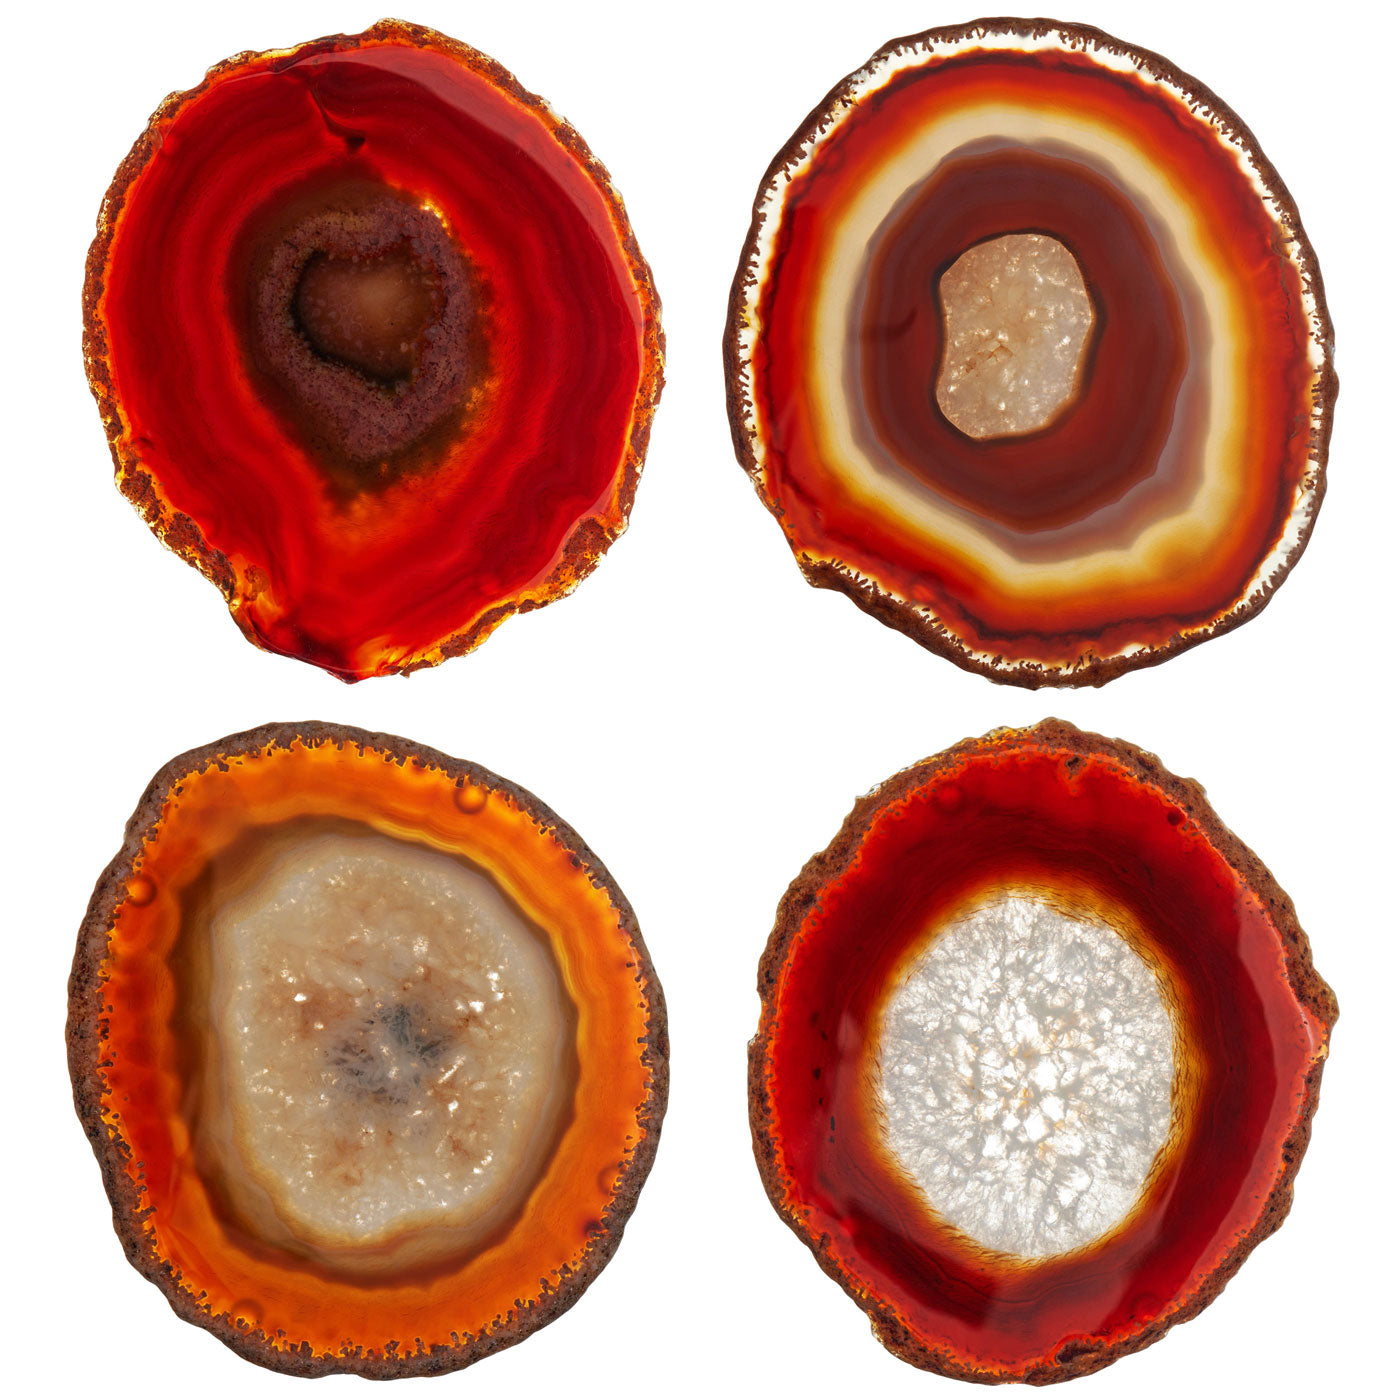 Set of 4 Natural Brazilian Agate Drink Coasters with Wood Holder - Red Amber